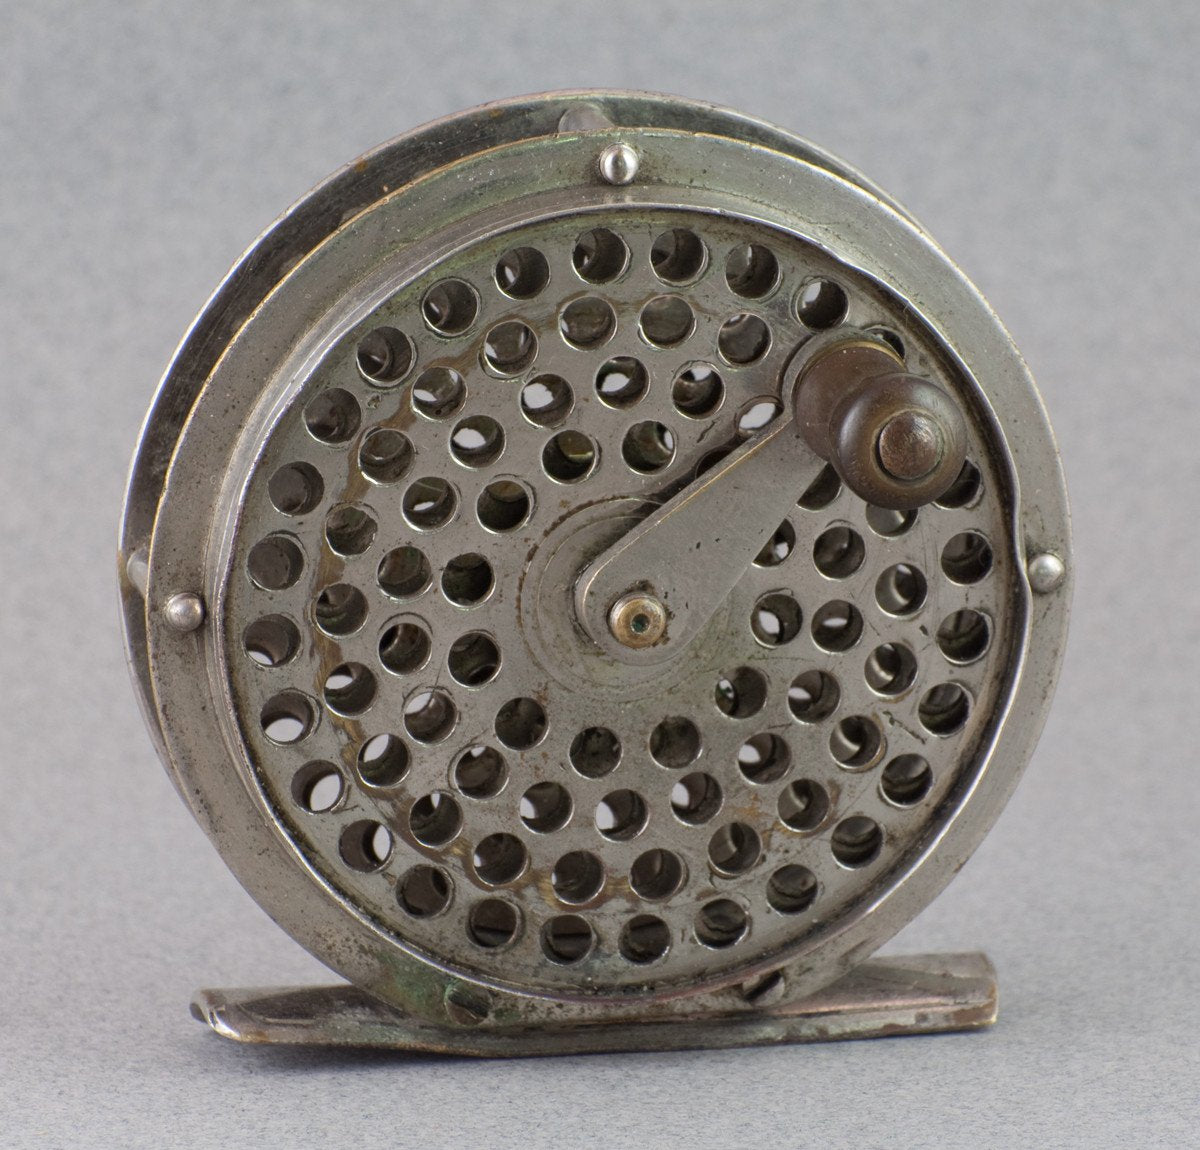 Orvis 1874 Early Trout Fly Reel